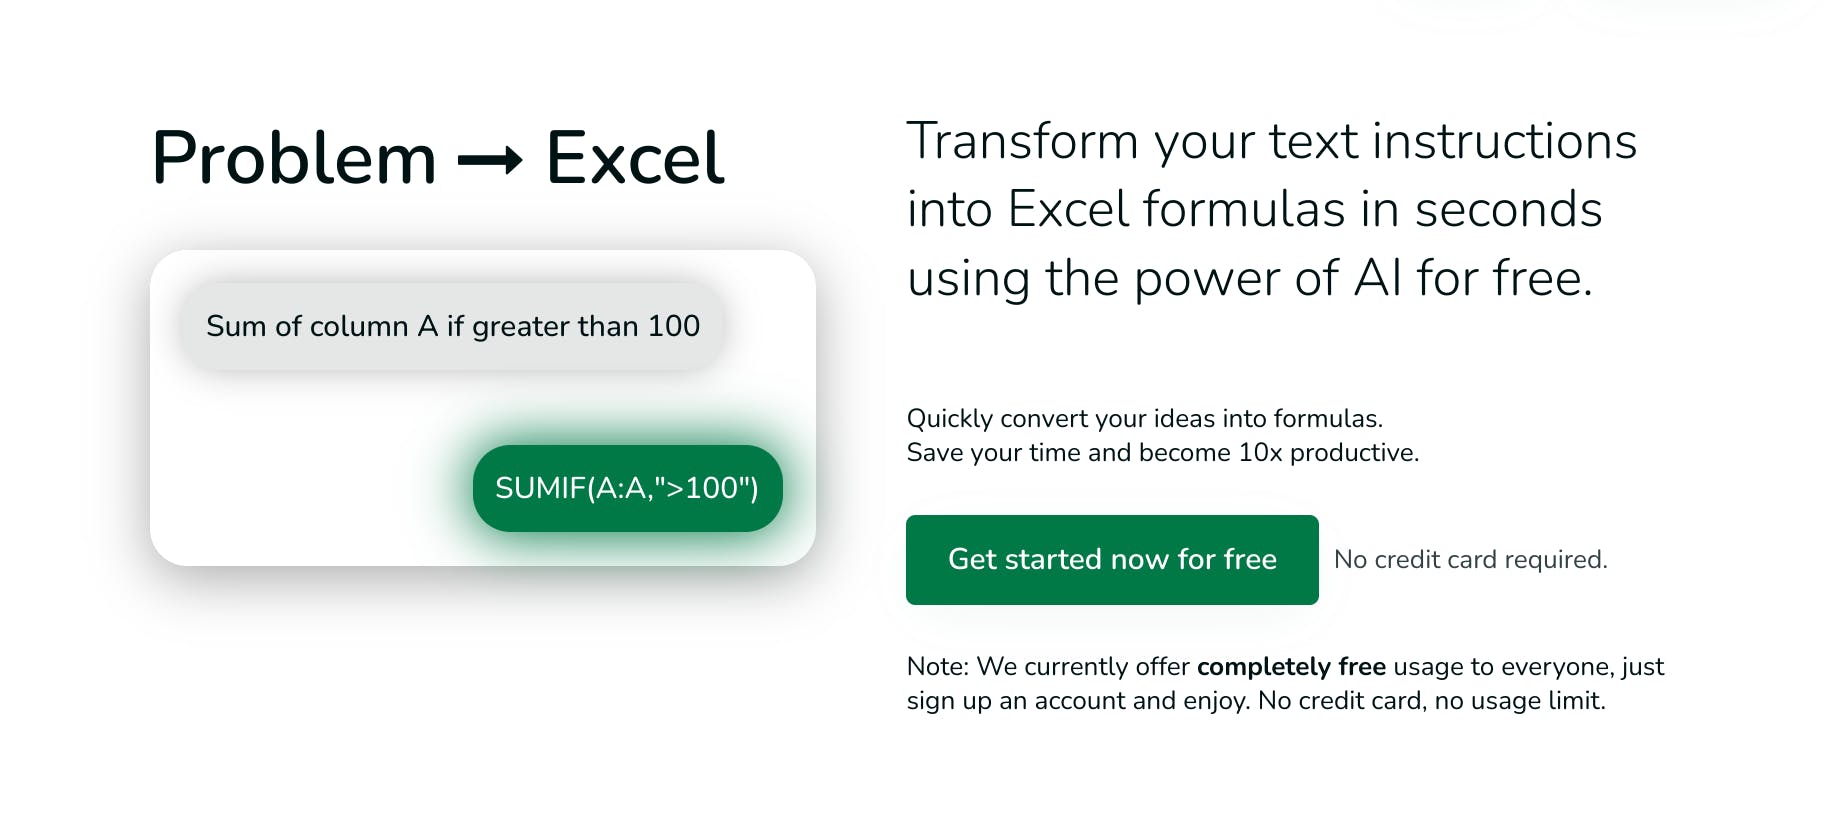 Excel公式化器 -  Excel式を生成するツール